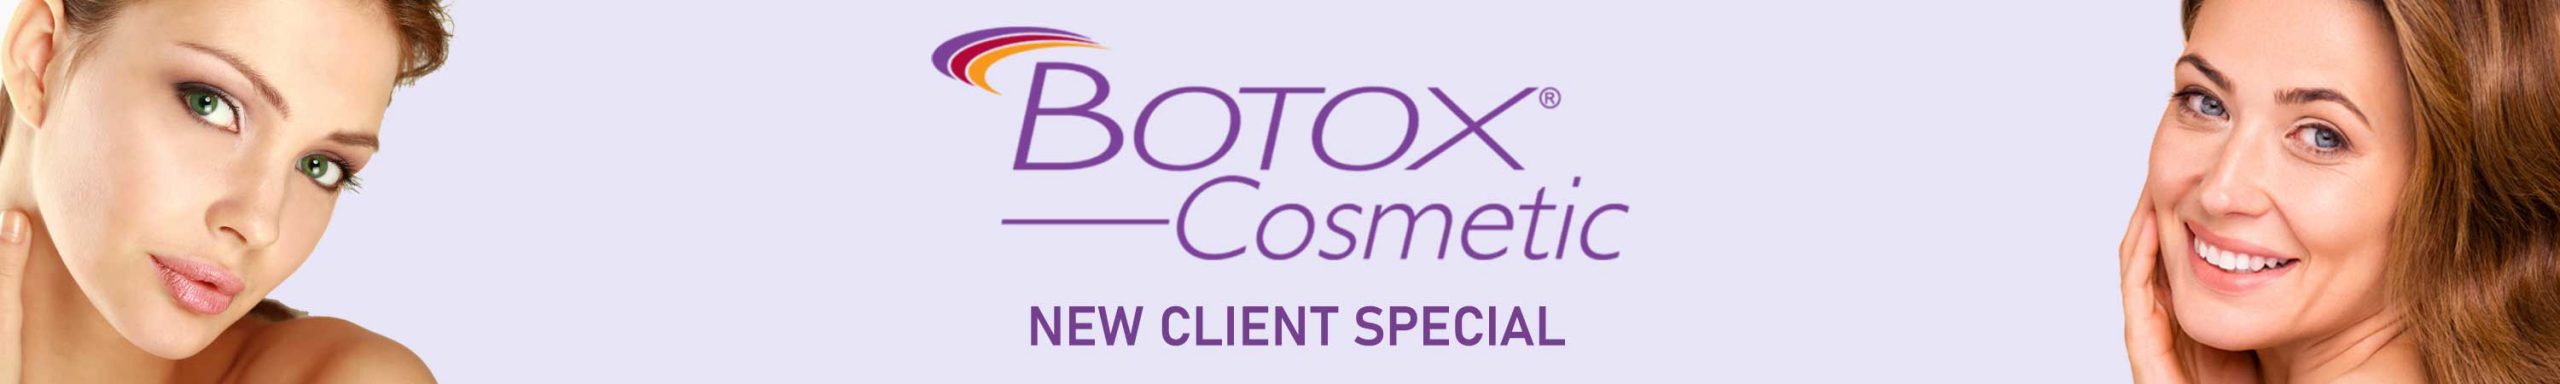 botox-new-client-special-banner